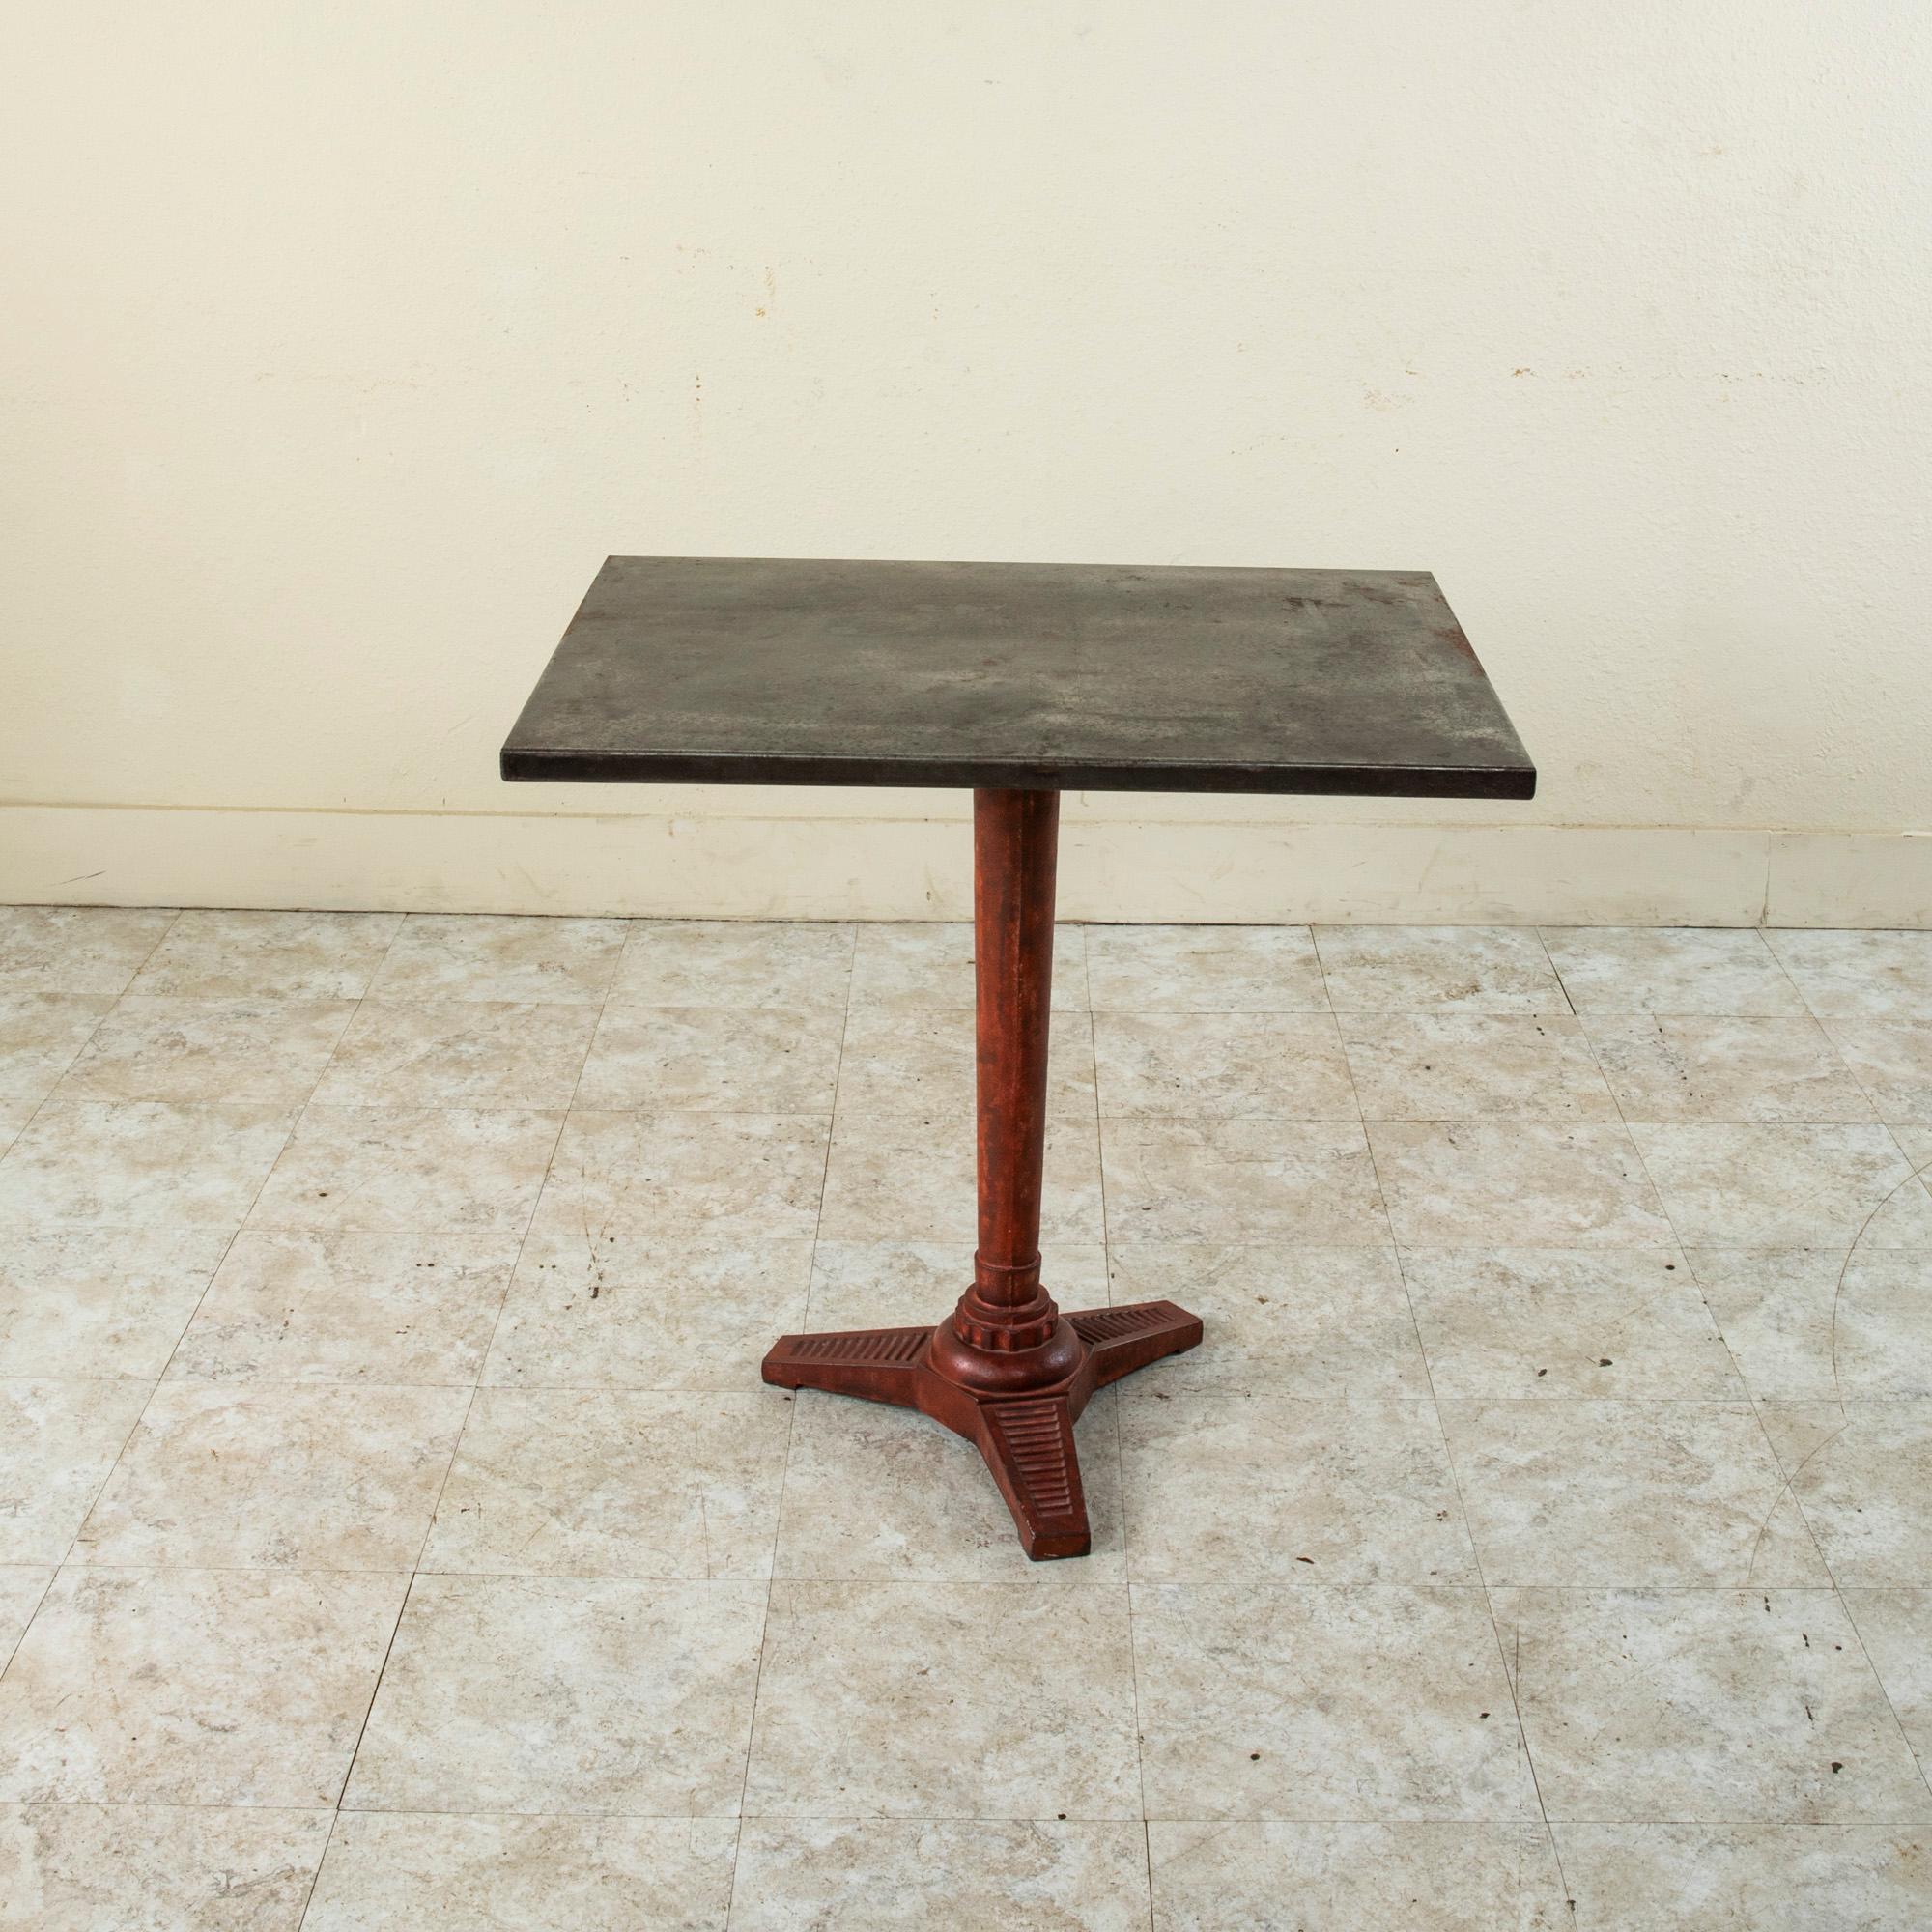 This early twentieth century French Art Deco period rectangular bistro table or cafe table features a metal top on a cast iron pedestal base. The base is painted red and rests on tripod feet detailed with striation. A charming table to lend a bit of